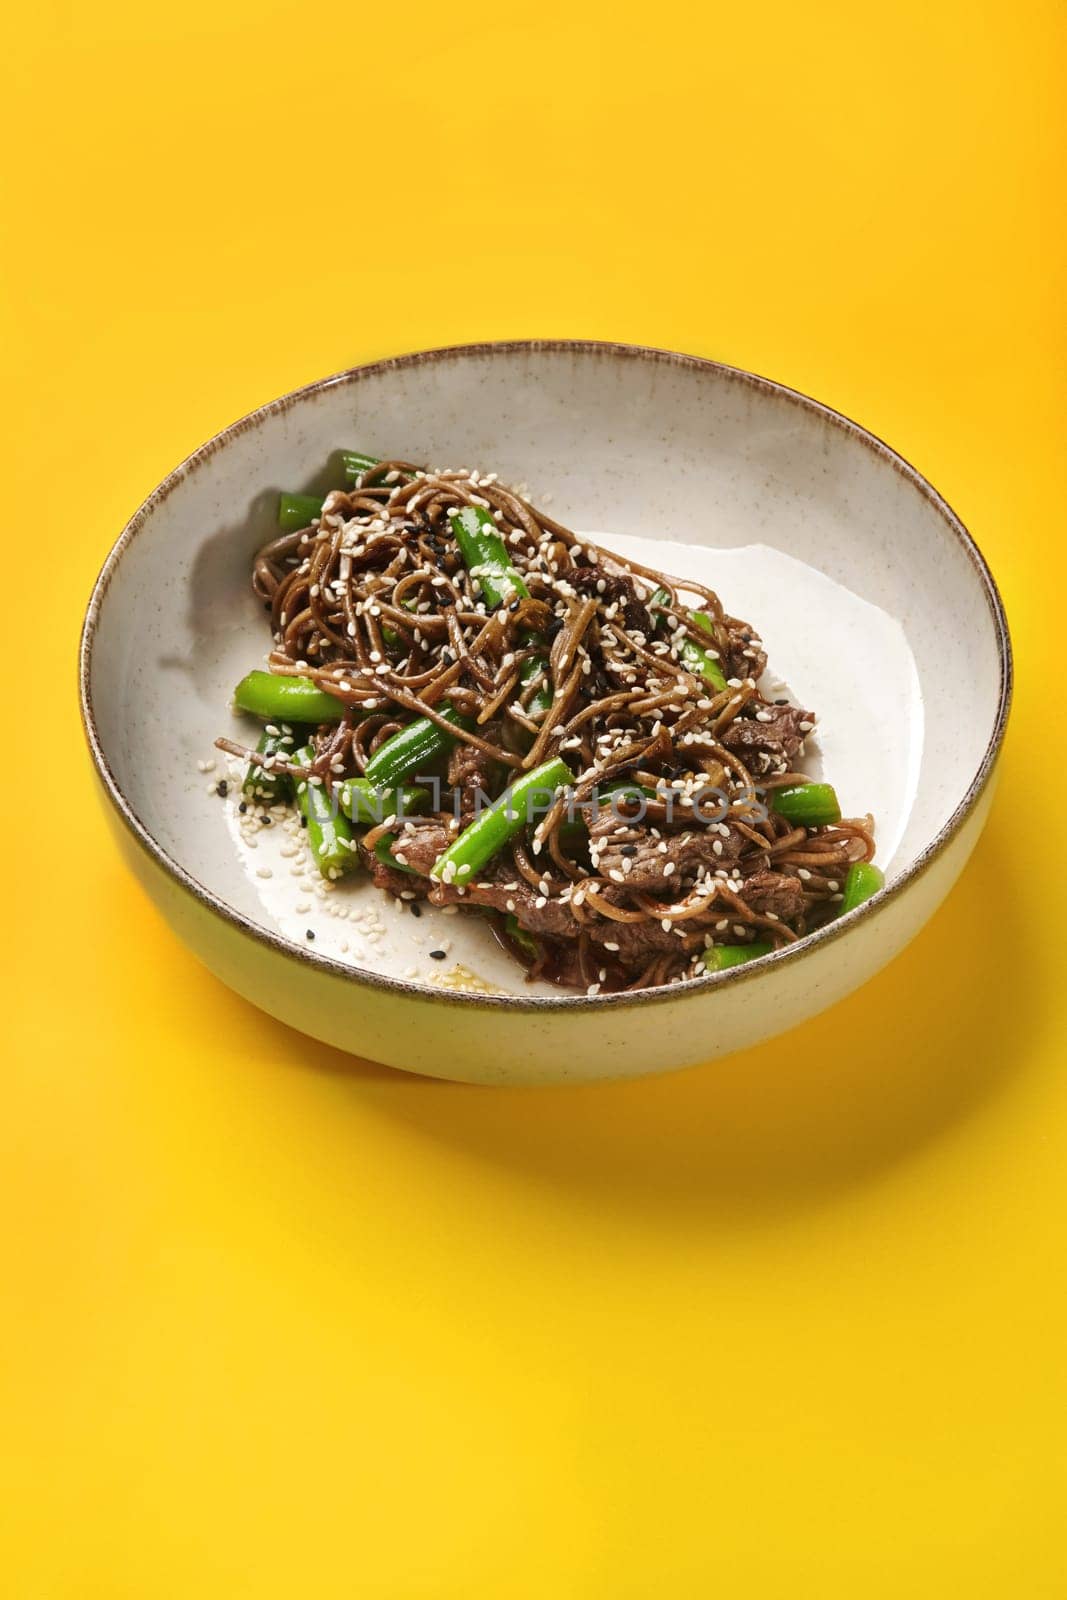 Soba noodles with stir-fried beef and green beans on yellow by nazarovsergey